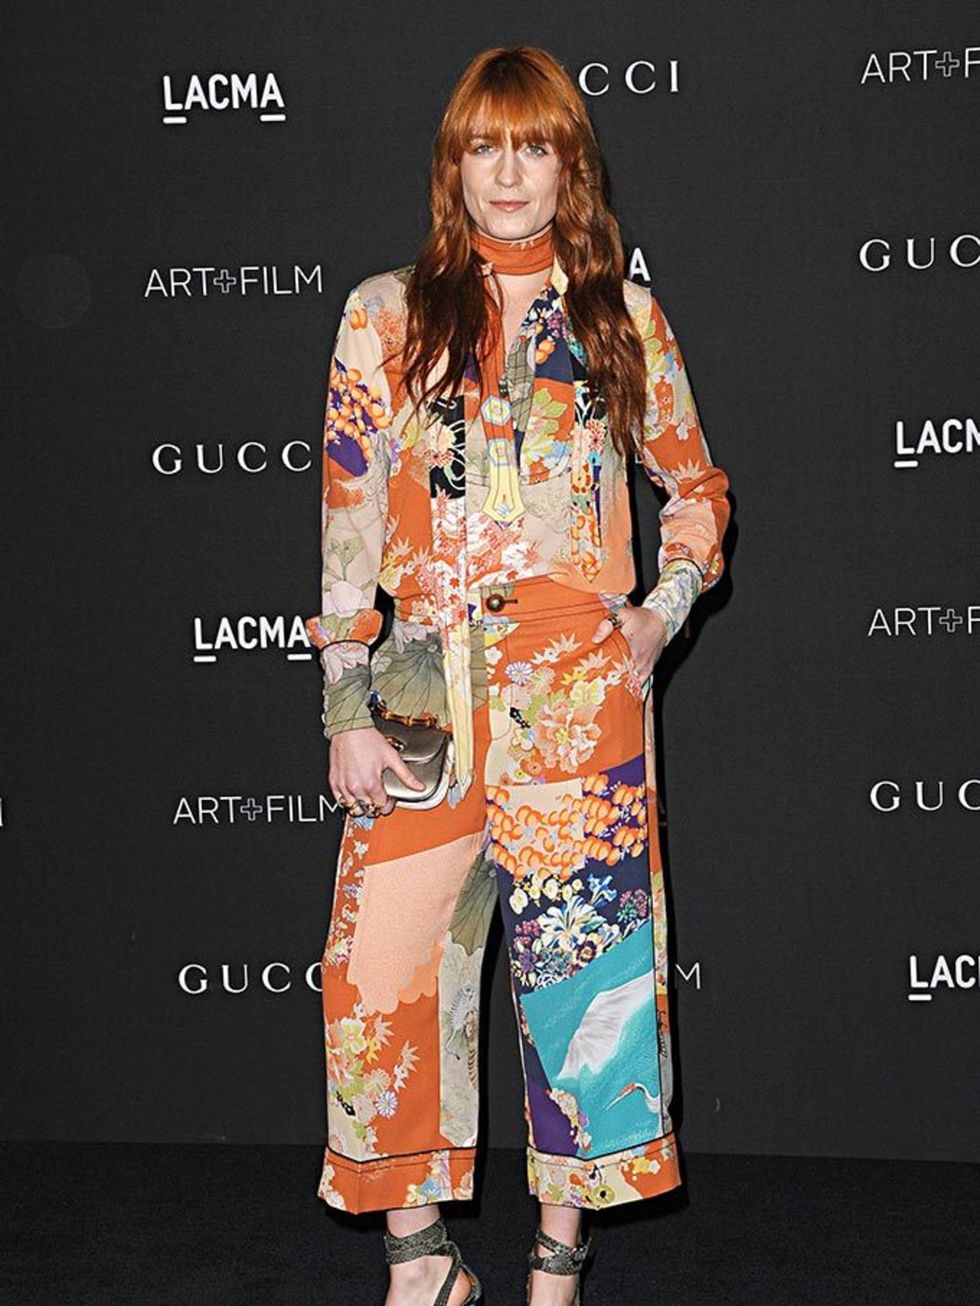 Florence Welch at the LACMA Art + Film Gala presented By Gucci, November 2014.